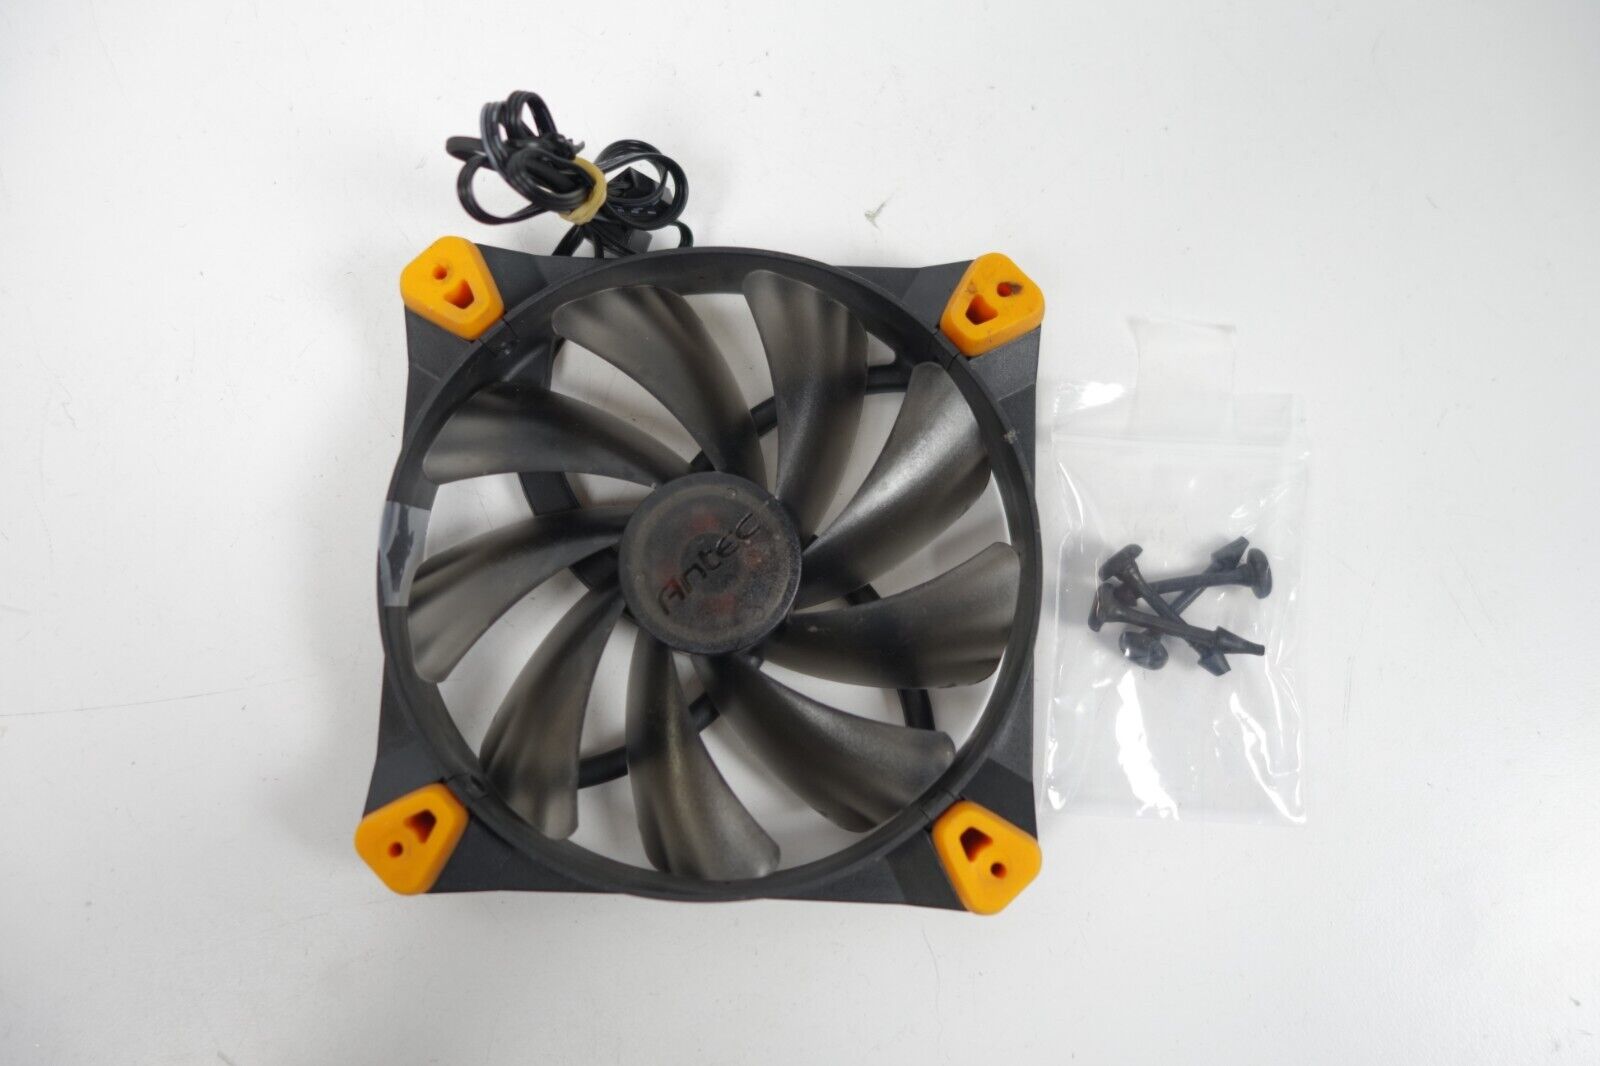 Antec 120mm Anti-Vibrating Cooling Fan Adjustable 2 Speed control for PC Case